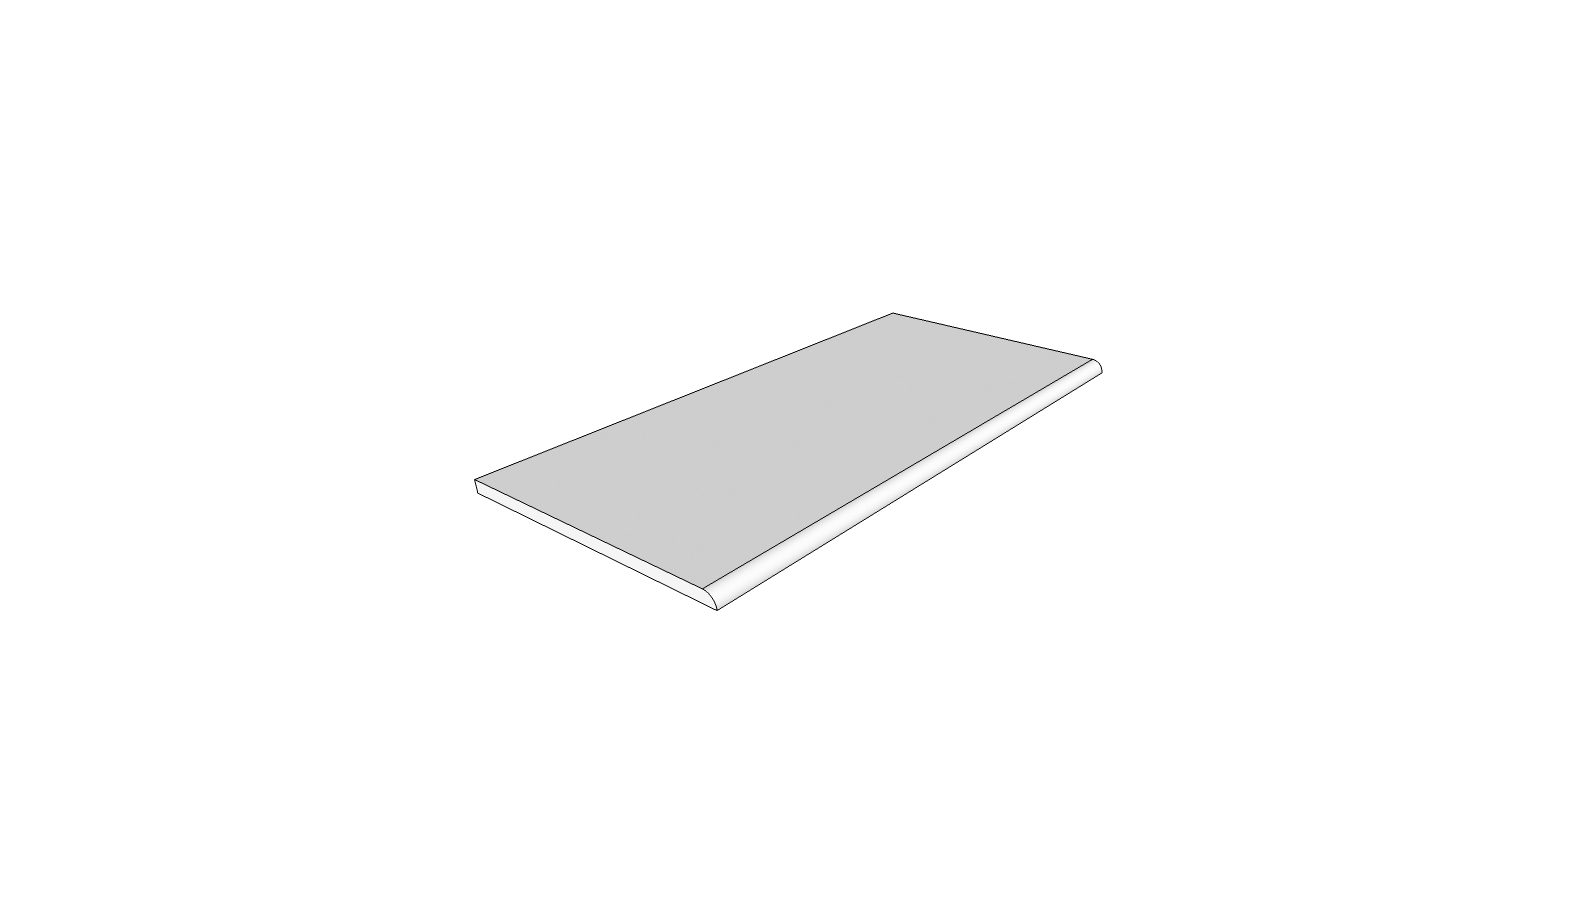 Bullnose surface rounded edge <span style="white-space:nowrap;">11"x32"</span>   <span style="white-space:nowrap;">thk. 20mm</span>